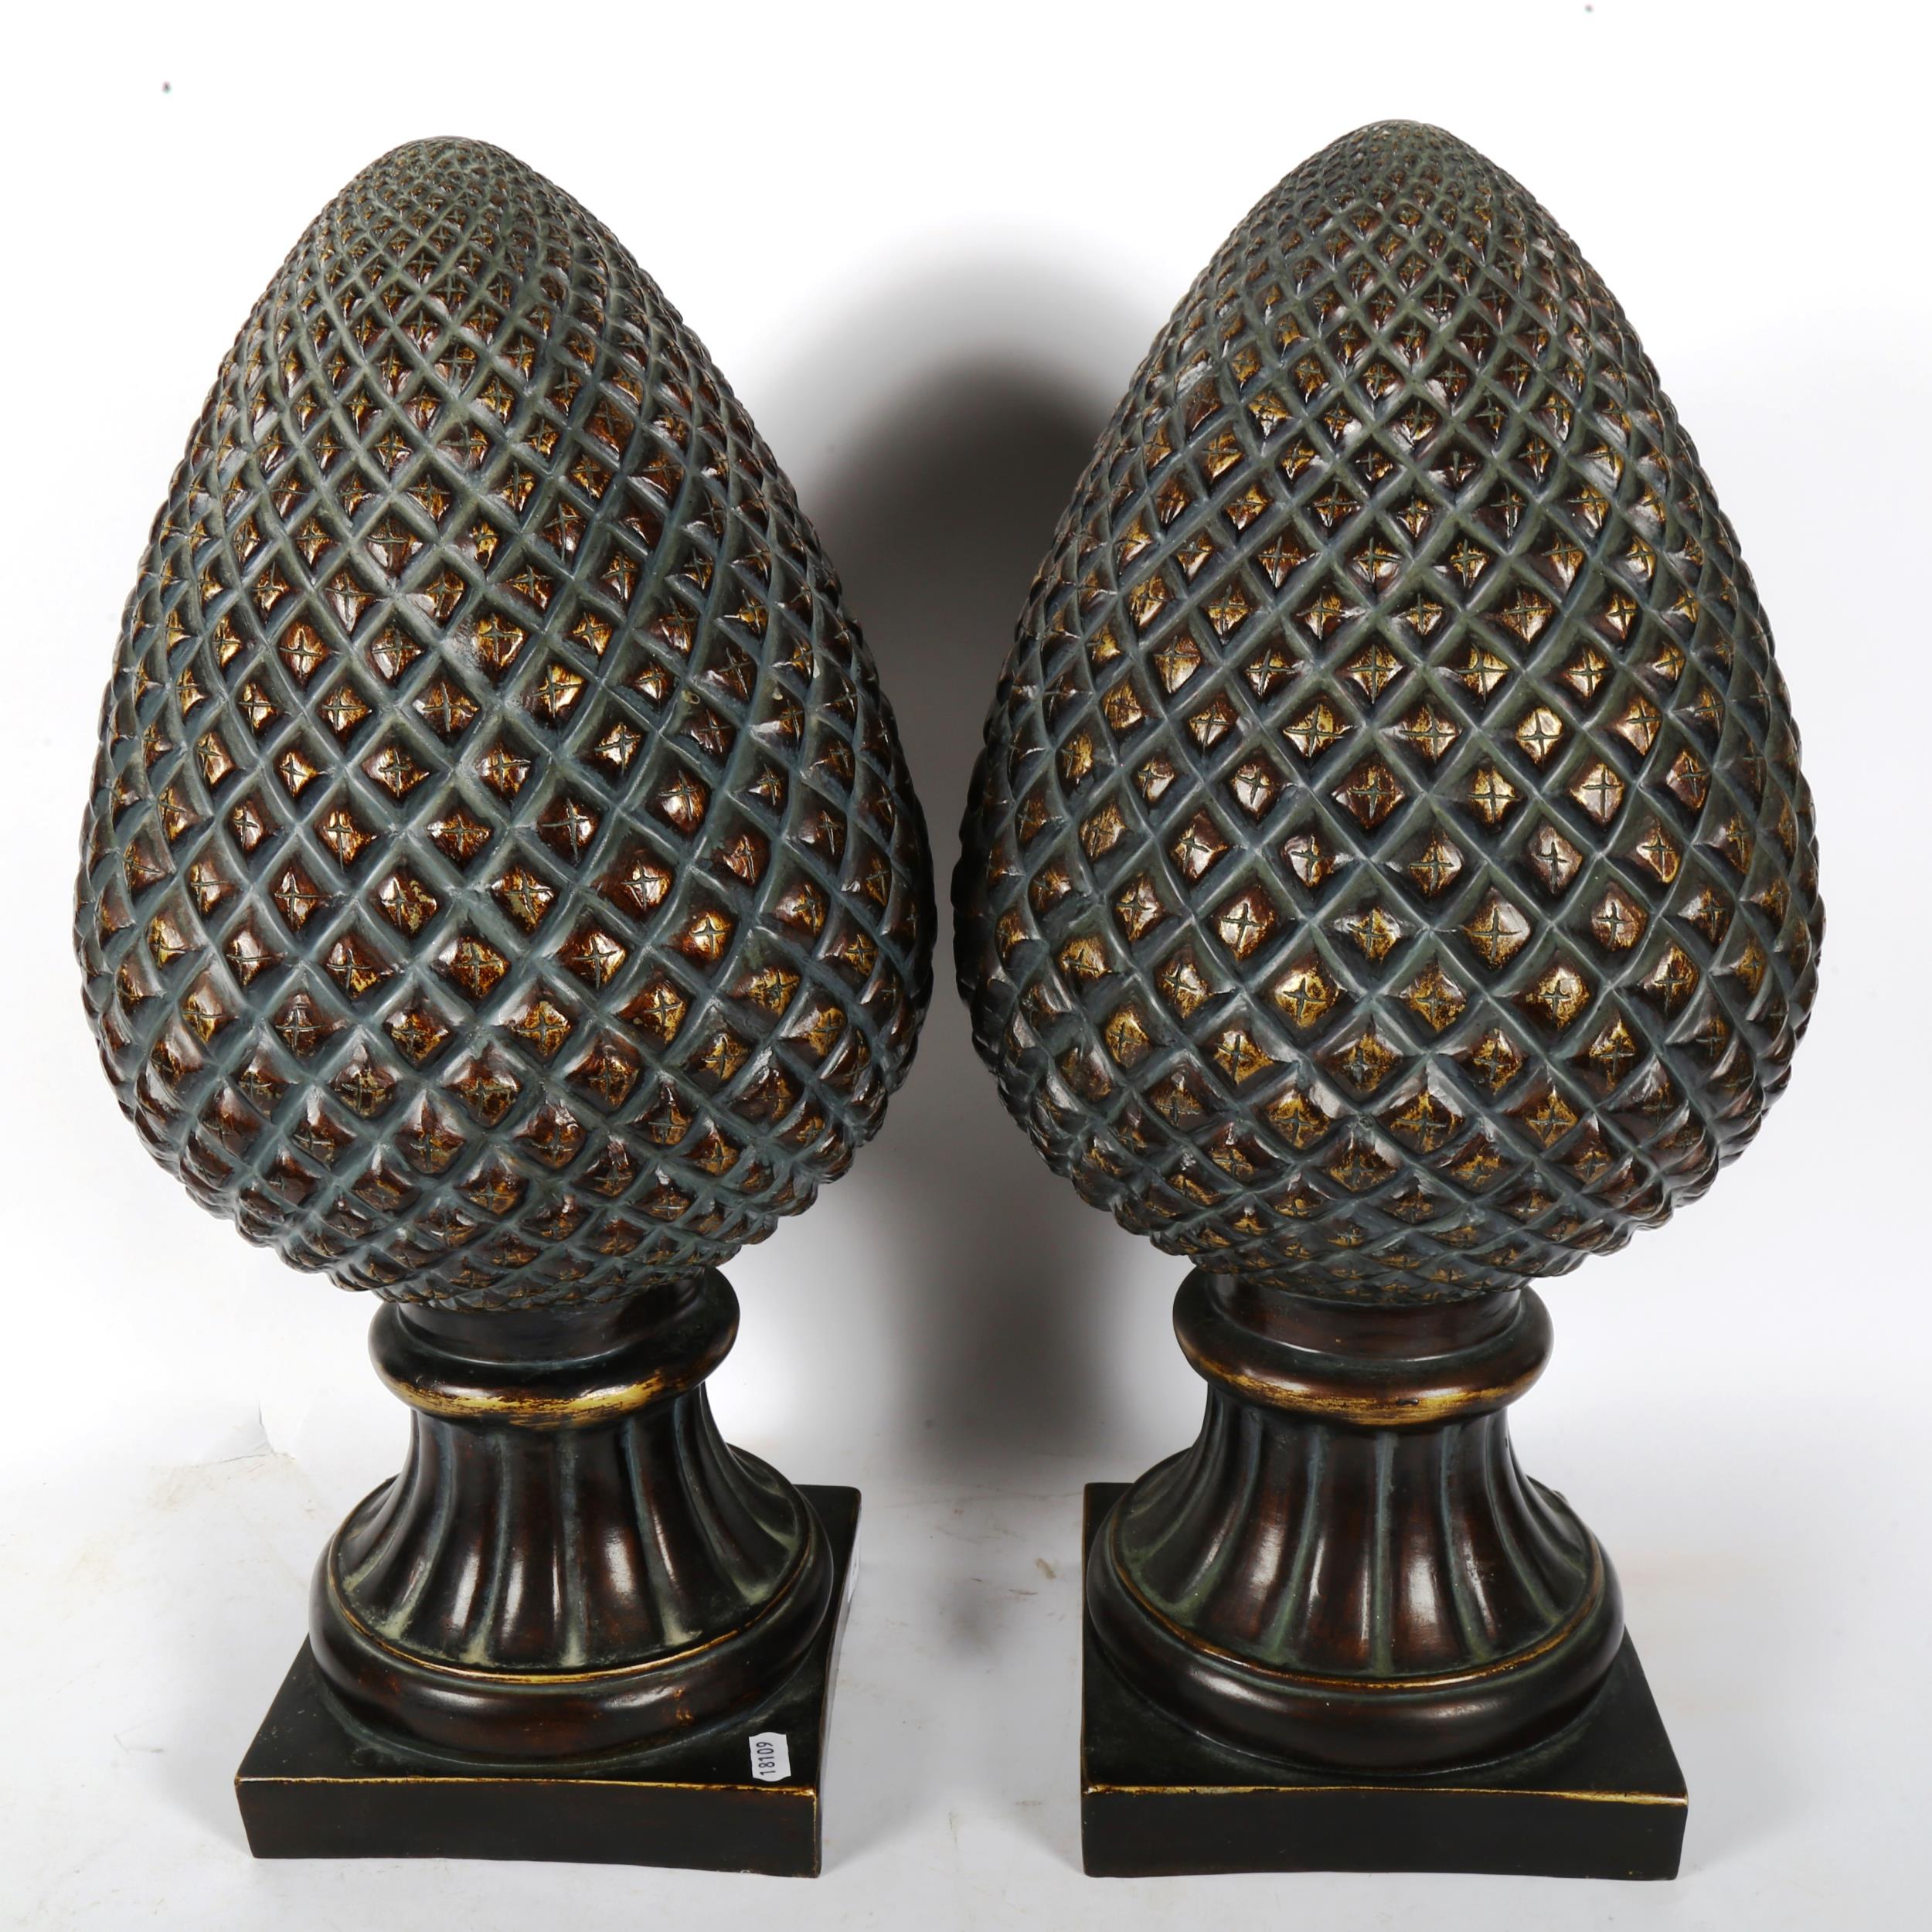 A large pair of resin pineapple finials, height 54cm